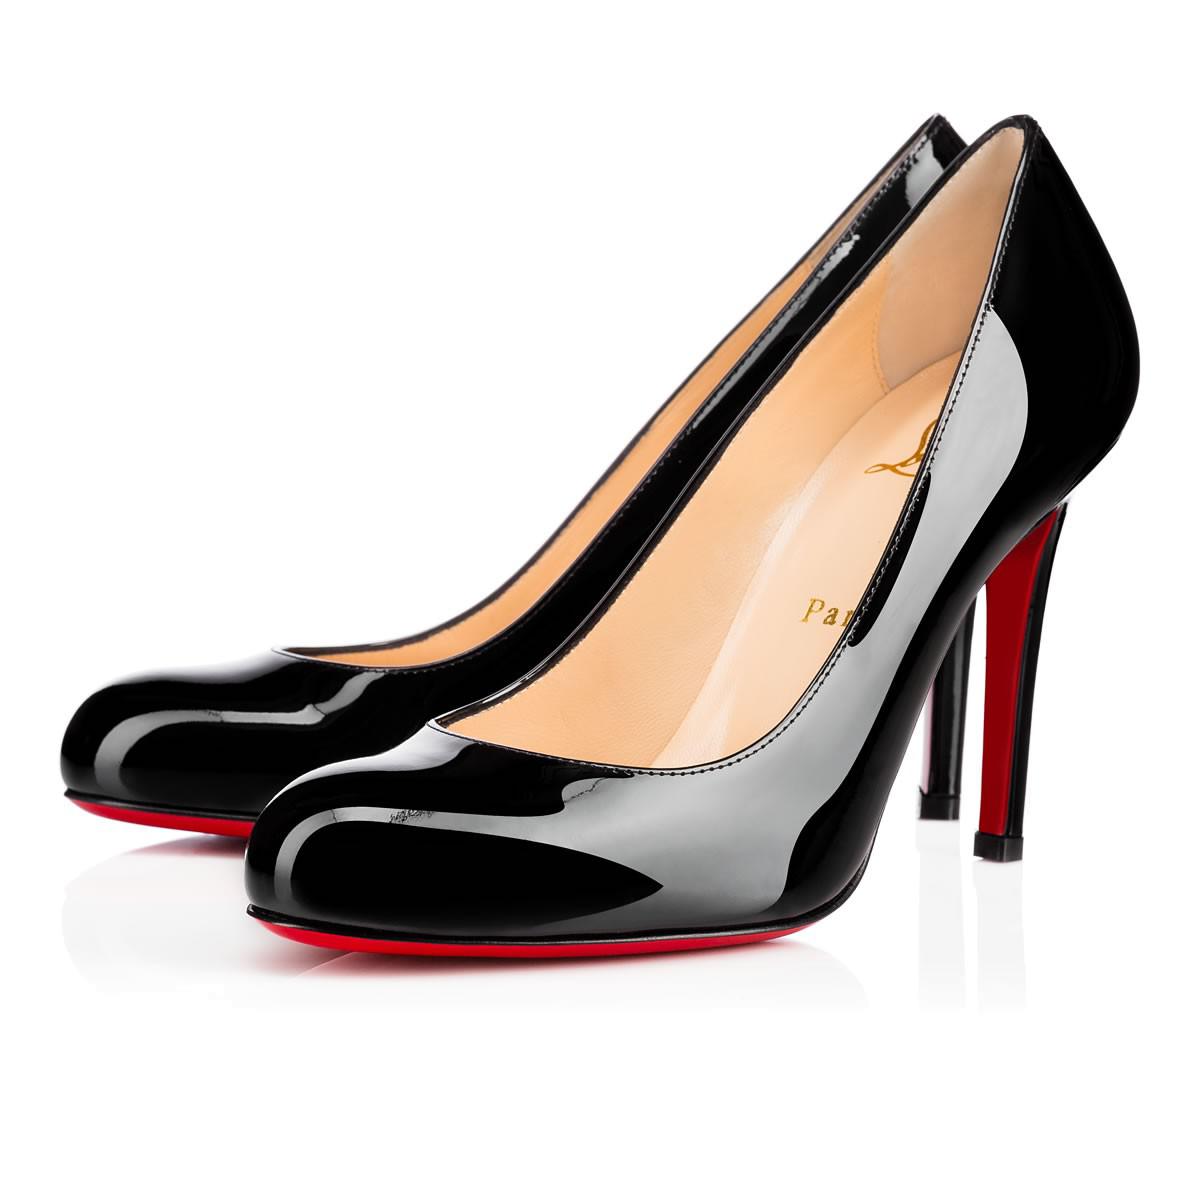 Lyst - Christian Louboutin Simple Pump in Black - Save 3%